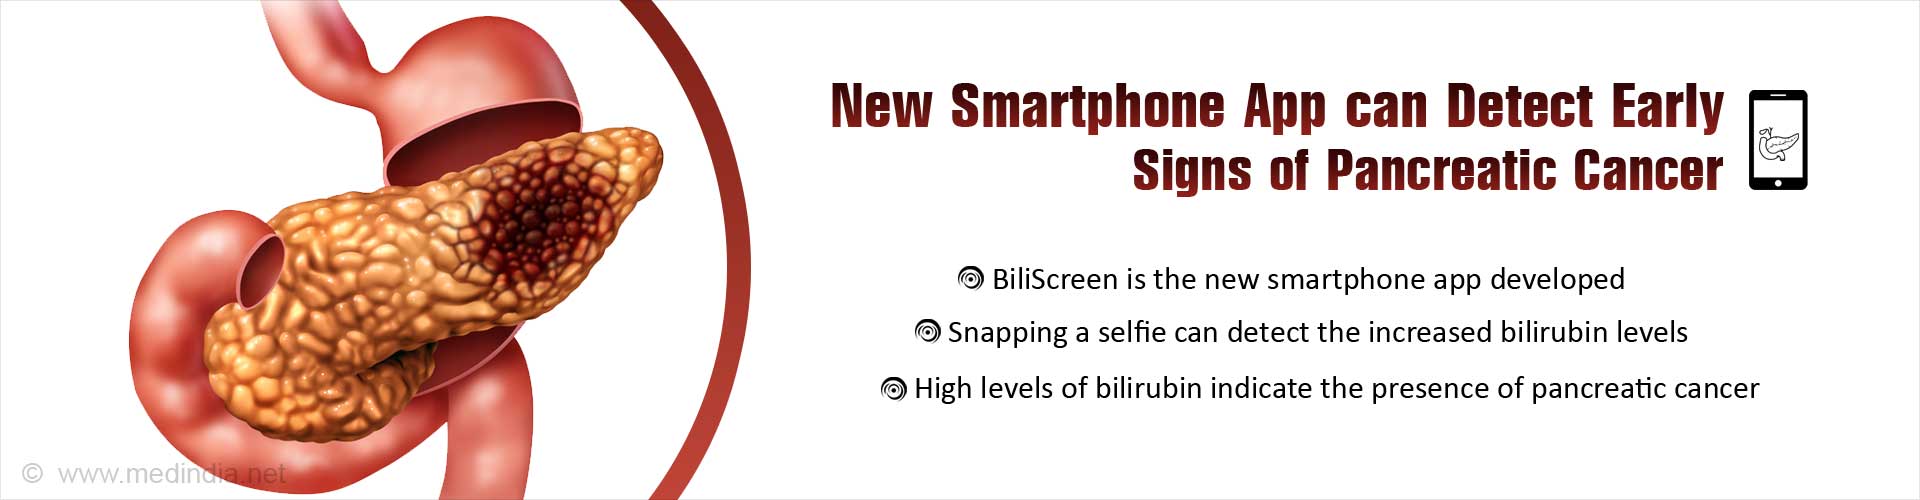 New smartphone app can detect early signs of pancreatic cancer
- BiliScreen is the new smartphone app developed
- Snapping a selfie can detect the increased bilirubin levels
- Hugh levels of bilirubin indicate the presence of pancreatic cancer